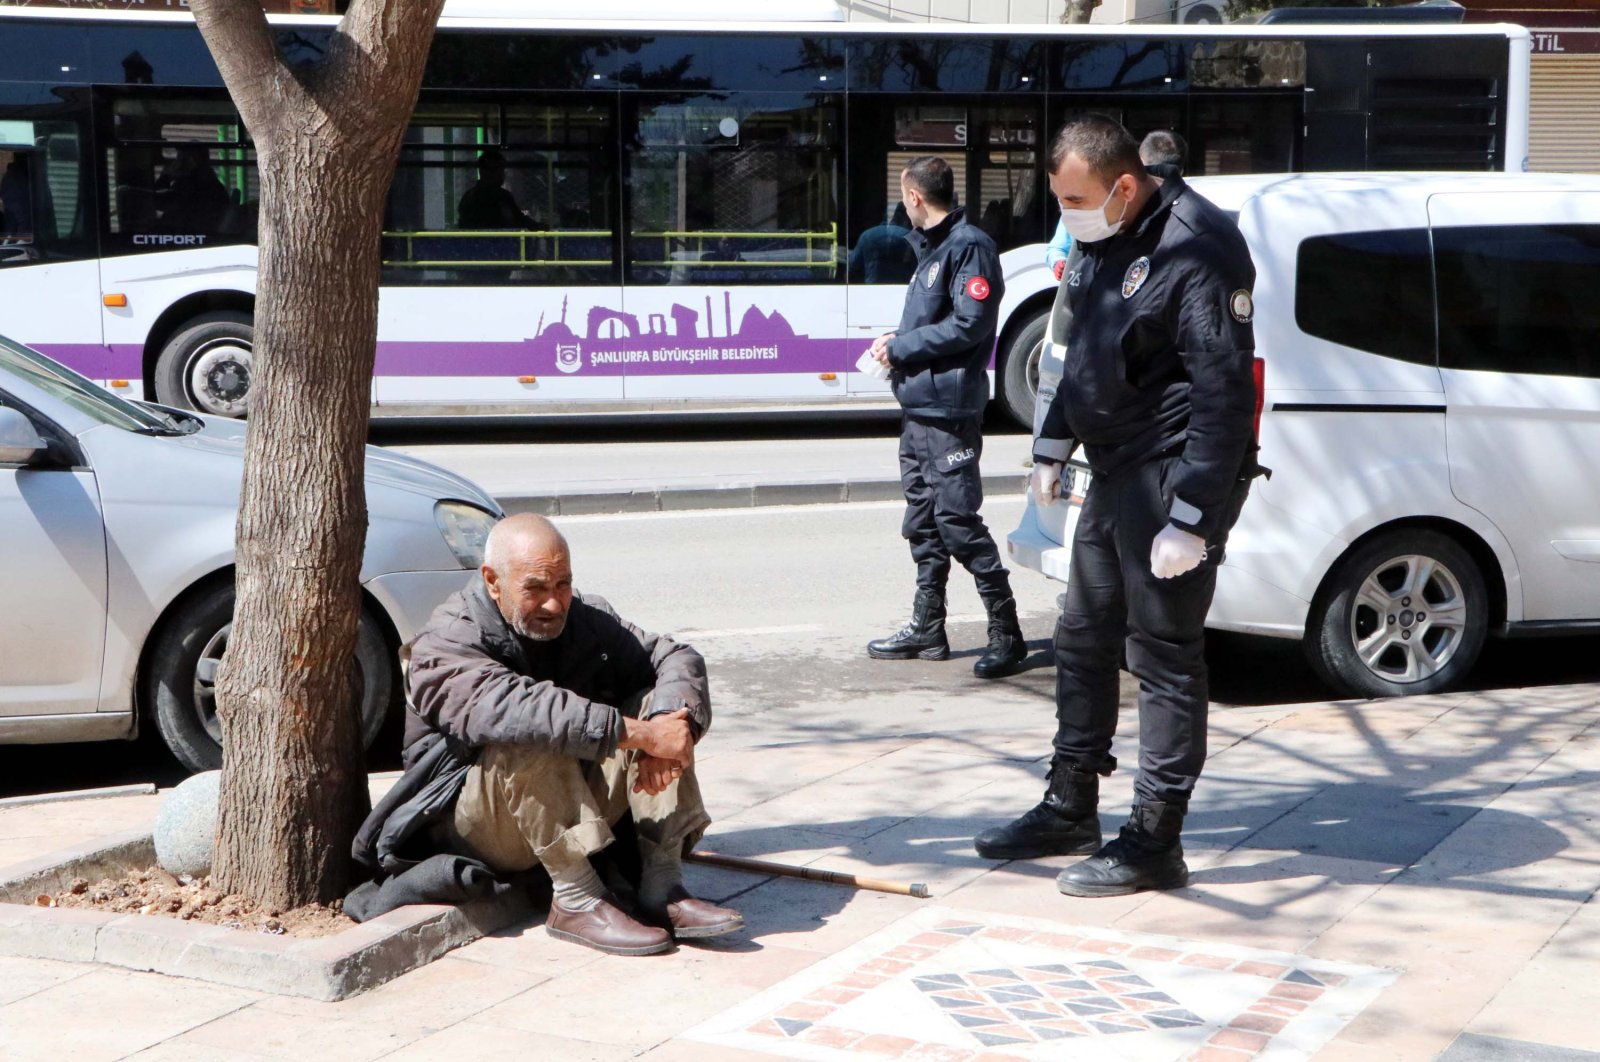 A police officer tries to convince a 68-year-old homeless man to let him take him to a shelter in Şanlıurfa, Sunday, March 22, 2020. (DHA Photo)